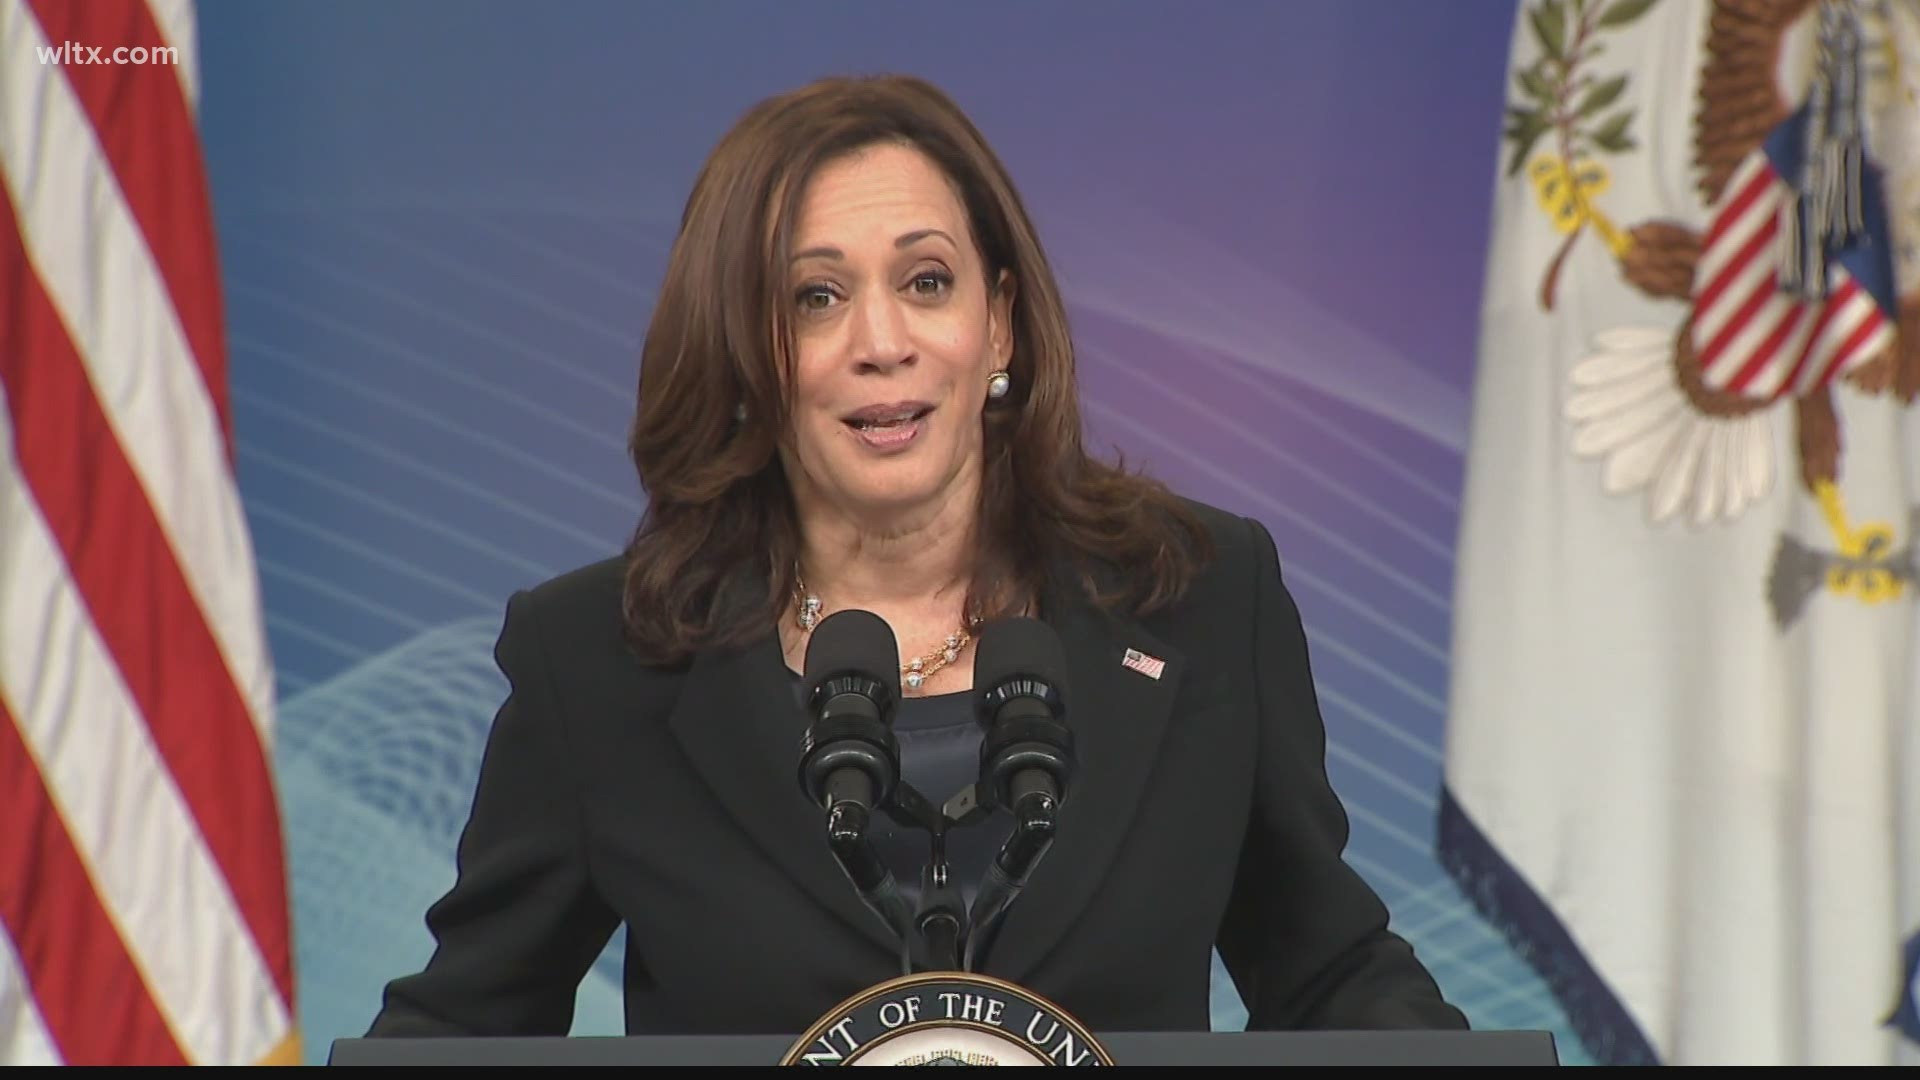 Kamala Harris will be in the state to promote vaccines, as South Carolina lags the nation in vaccinations.